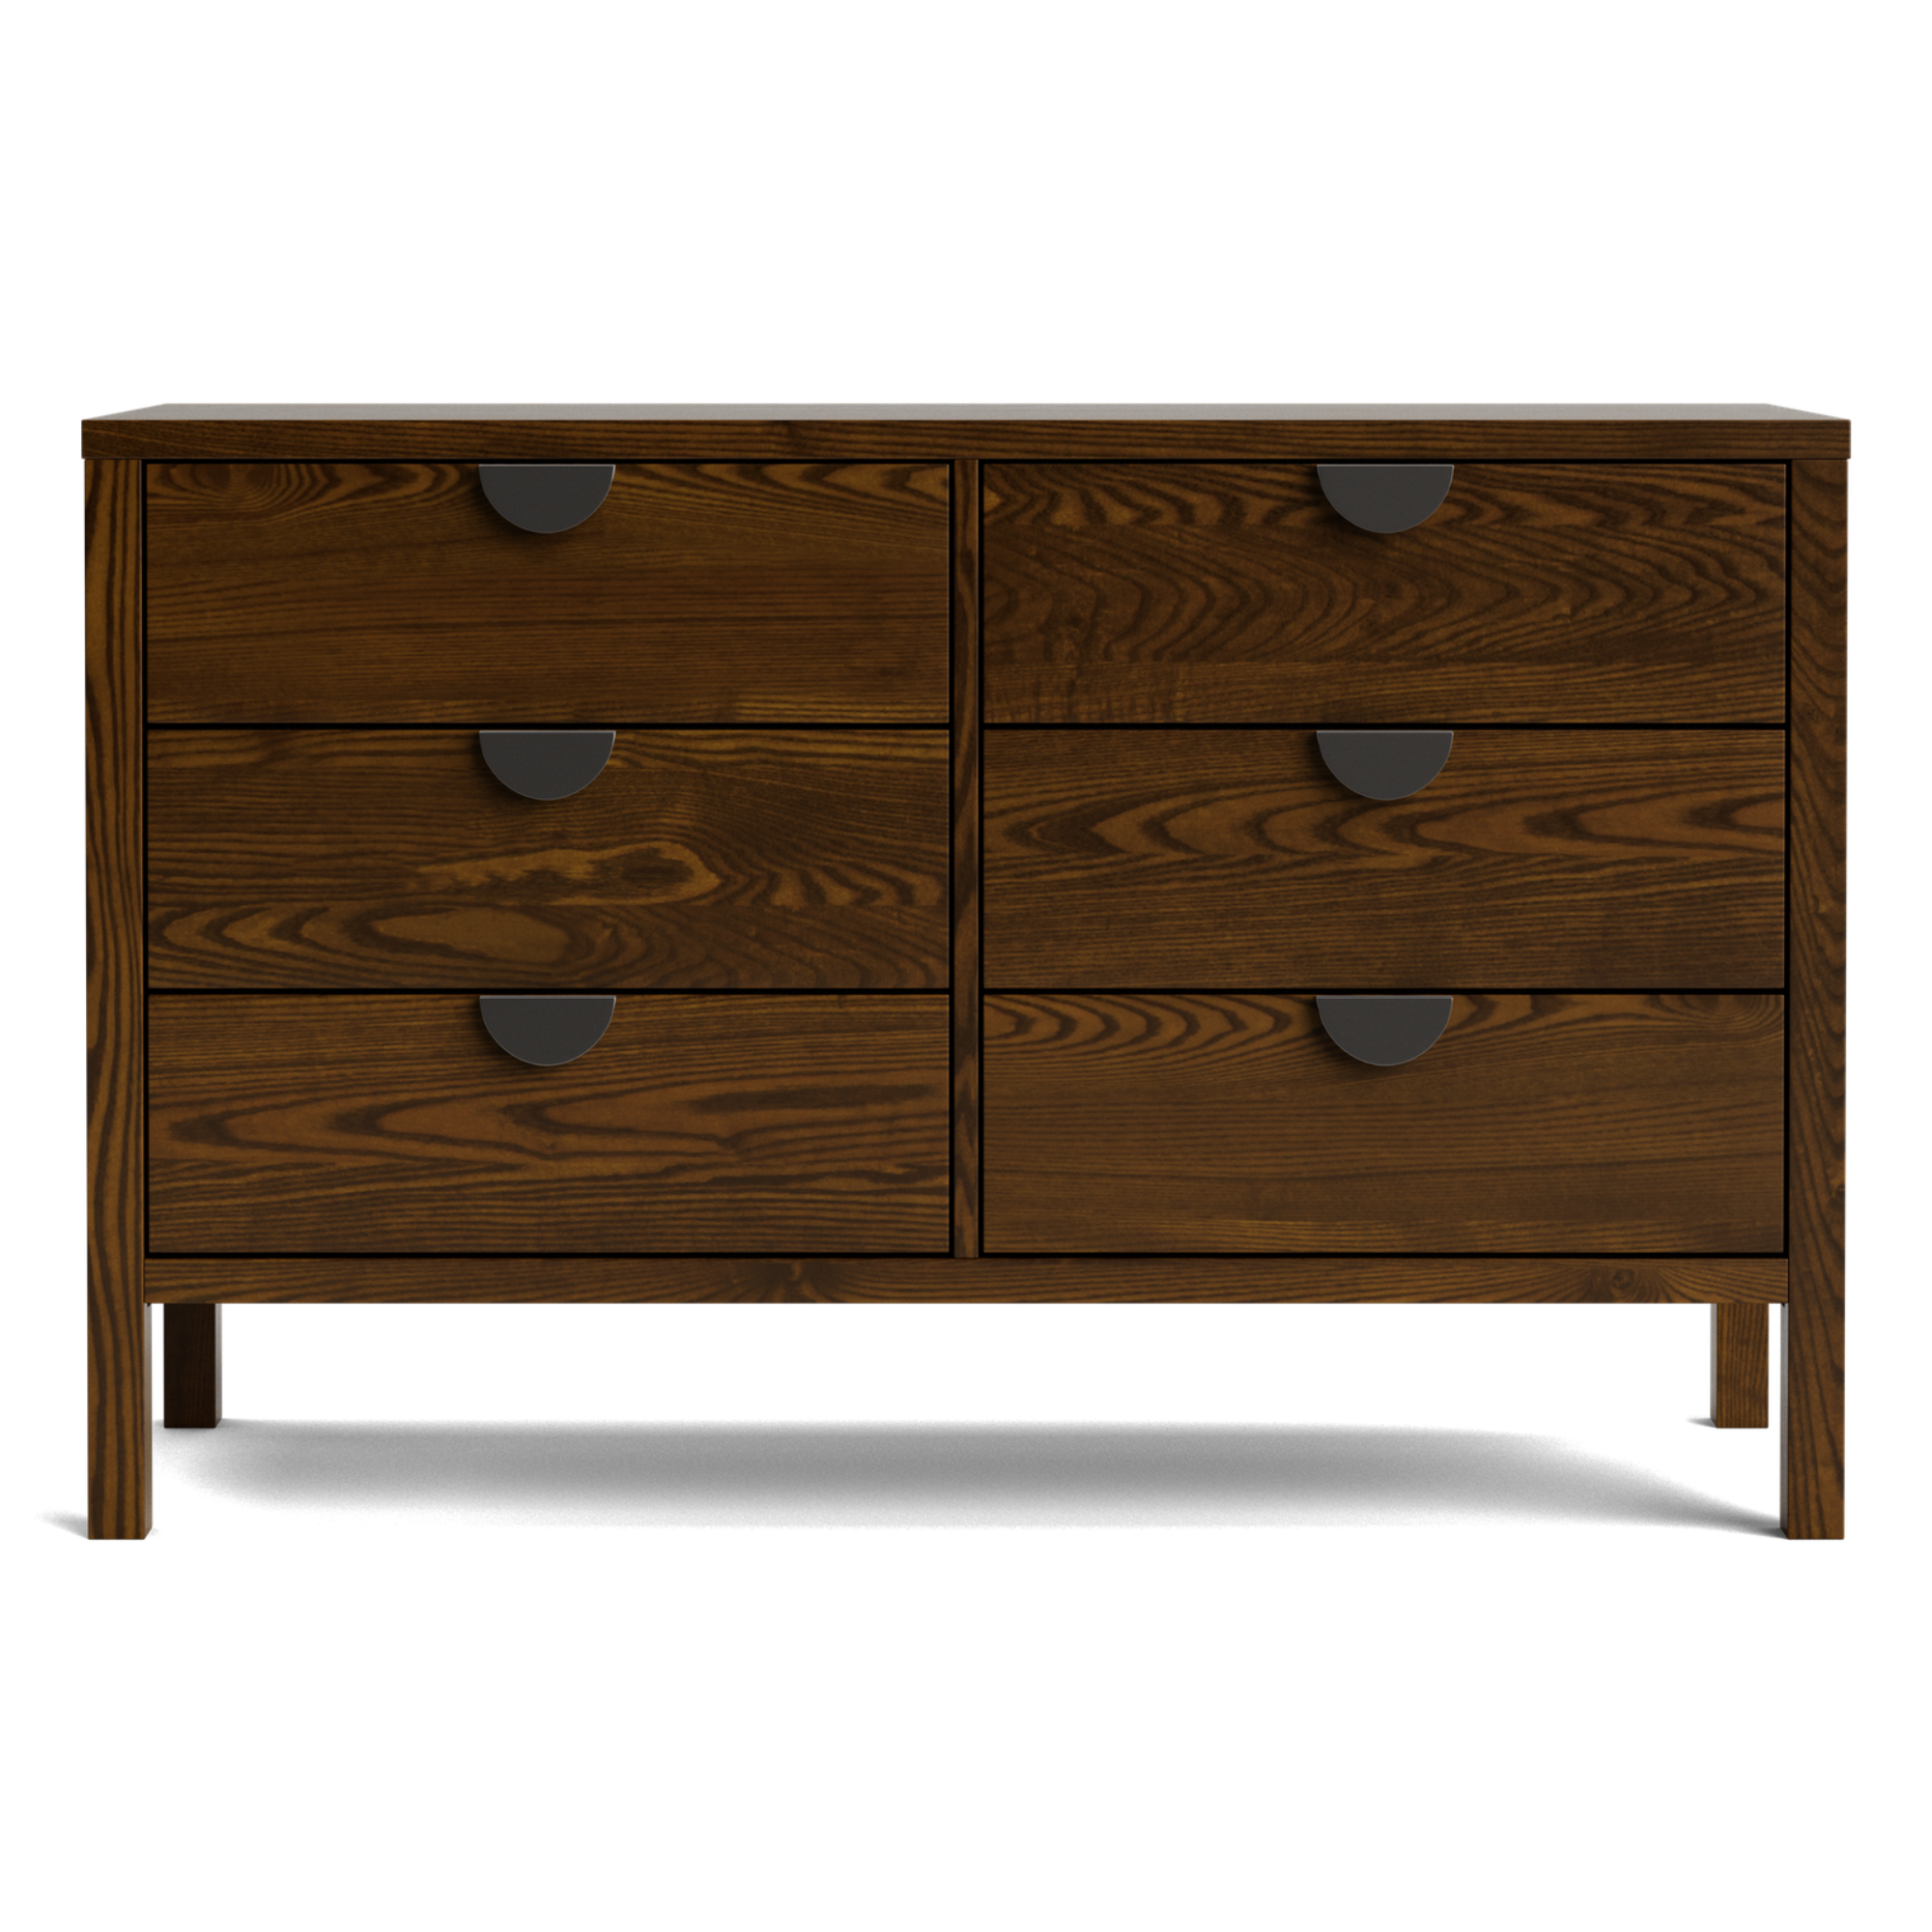 ANDES 6 DRAWER LOWBOY | NZ PINE OR AMERICAN ASH | NZ MADE